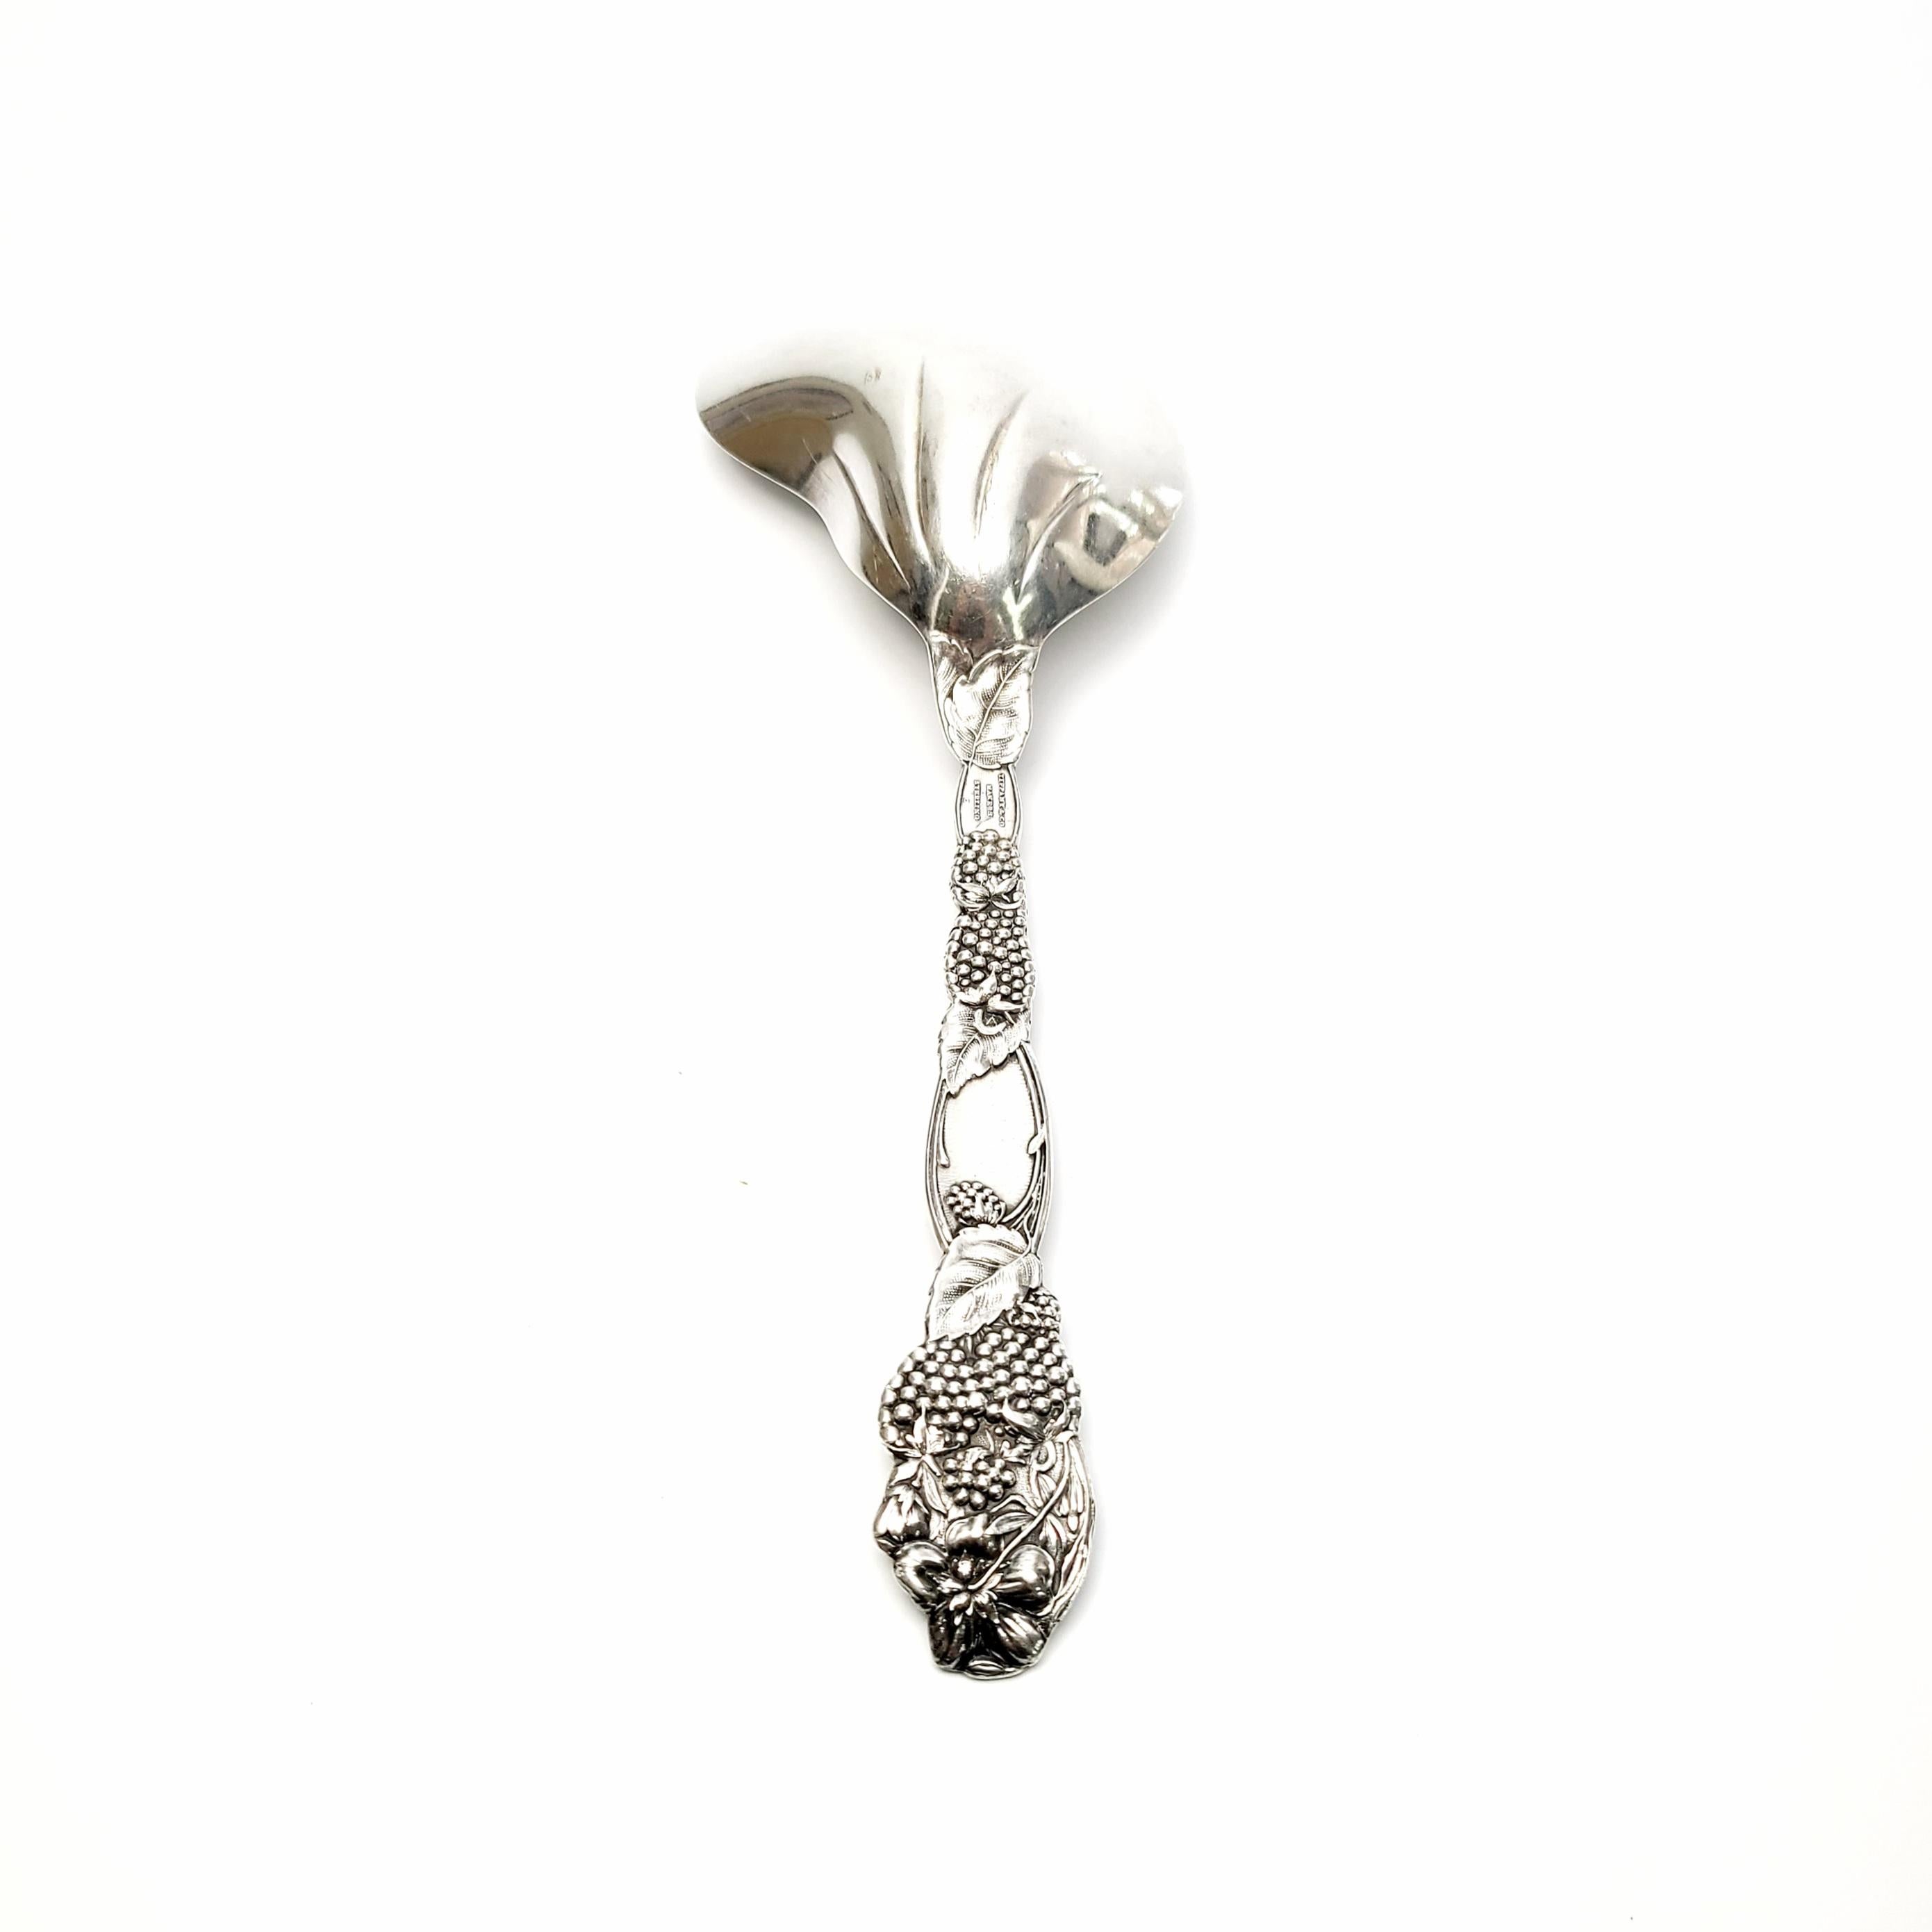 Antique sterling silver berry casserole spoon by Tiffany & Co. in the blackberry pattern.

Monogram appears to be MFA

Tiffany's Blackberry pattern was introduced in 1875. This spoon features the blackberry pattern handle with a kidney shaped